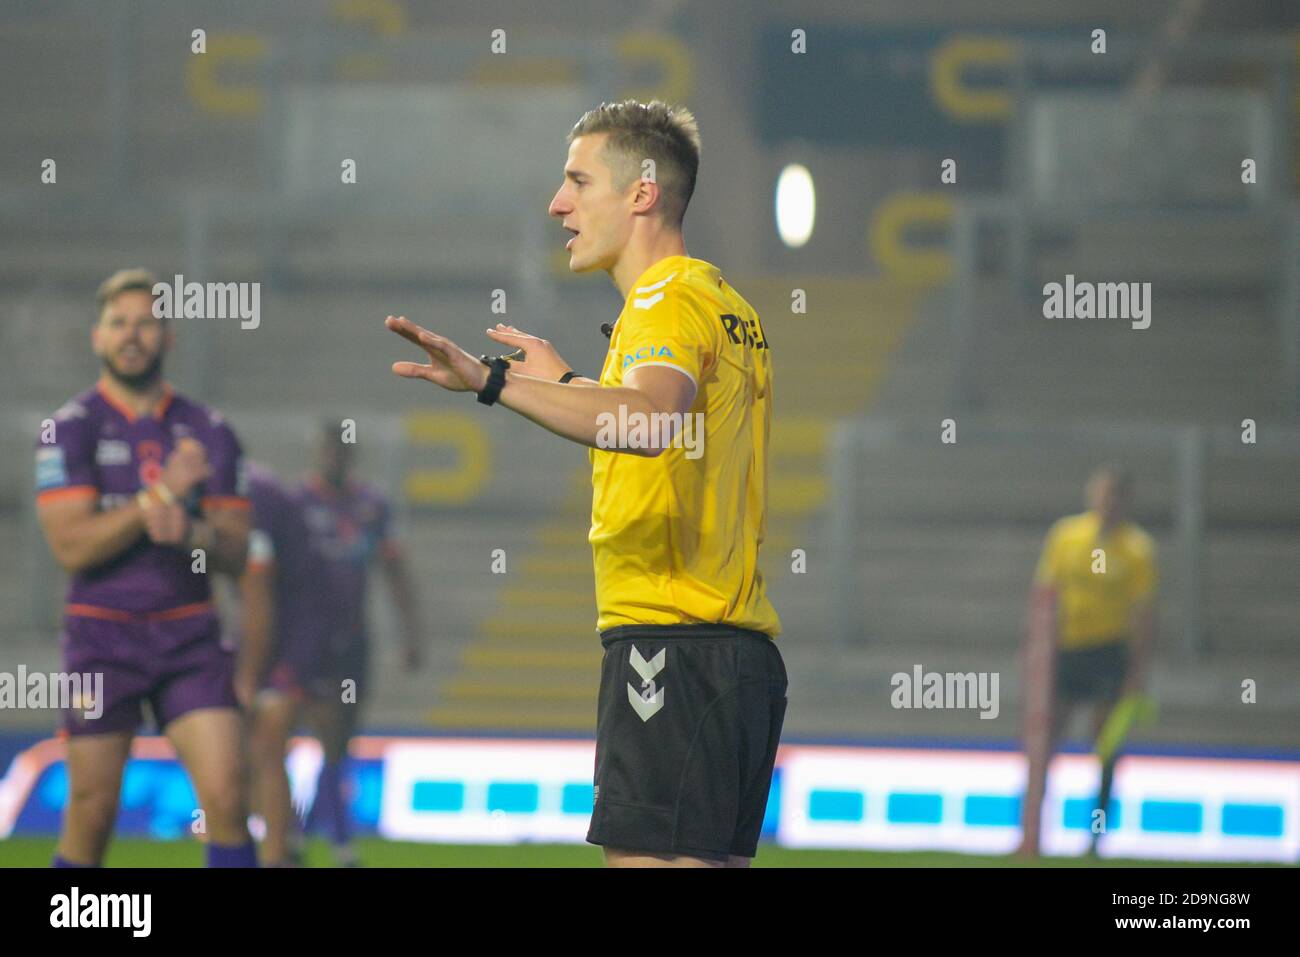 during the Betfred Super League match between Wigan V Huddersfield at The Emerald Headingley, Leeds,  United Kingdom on 06 November 2020. Stock Photo